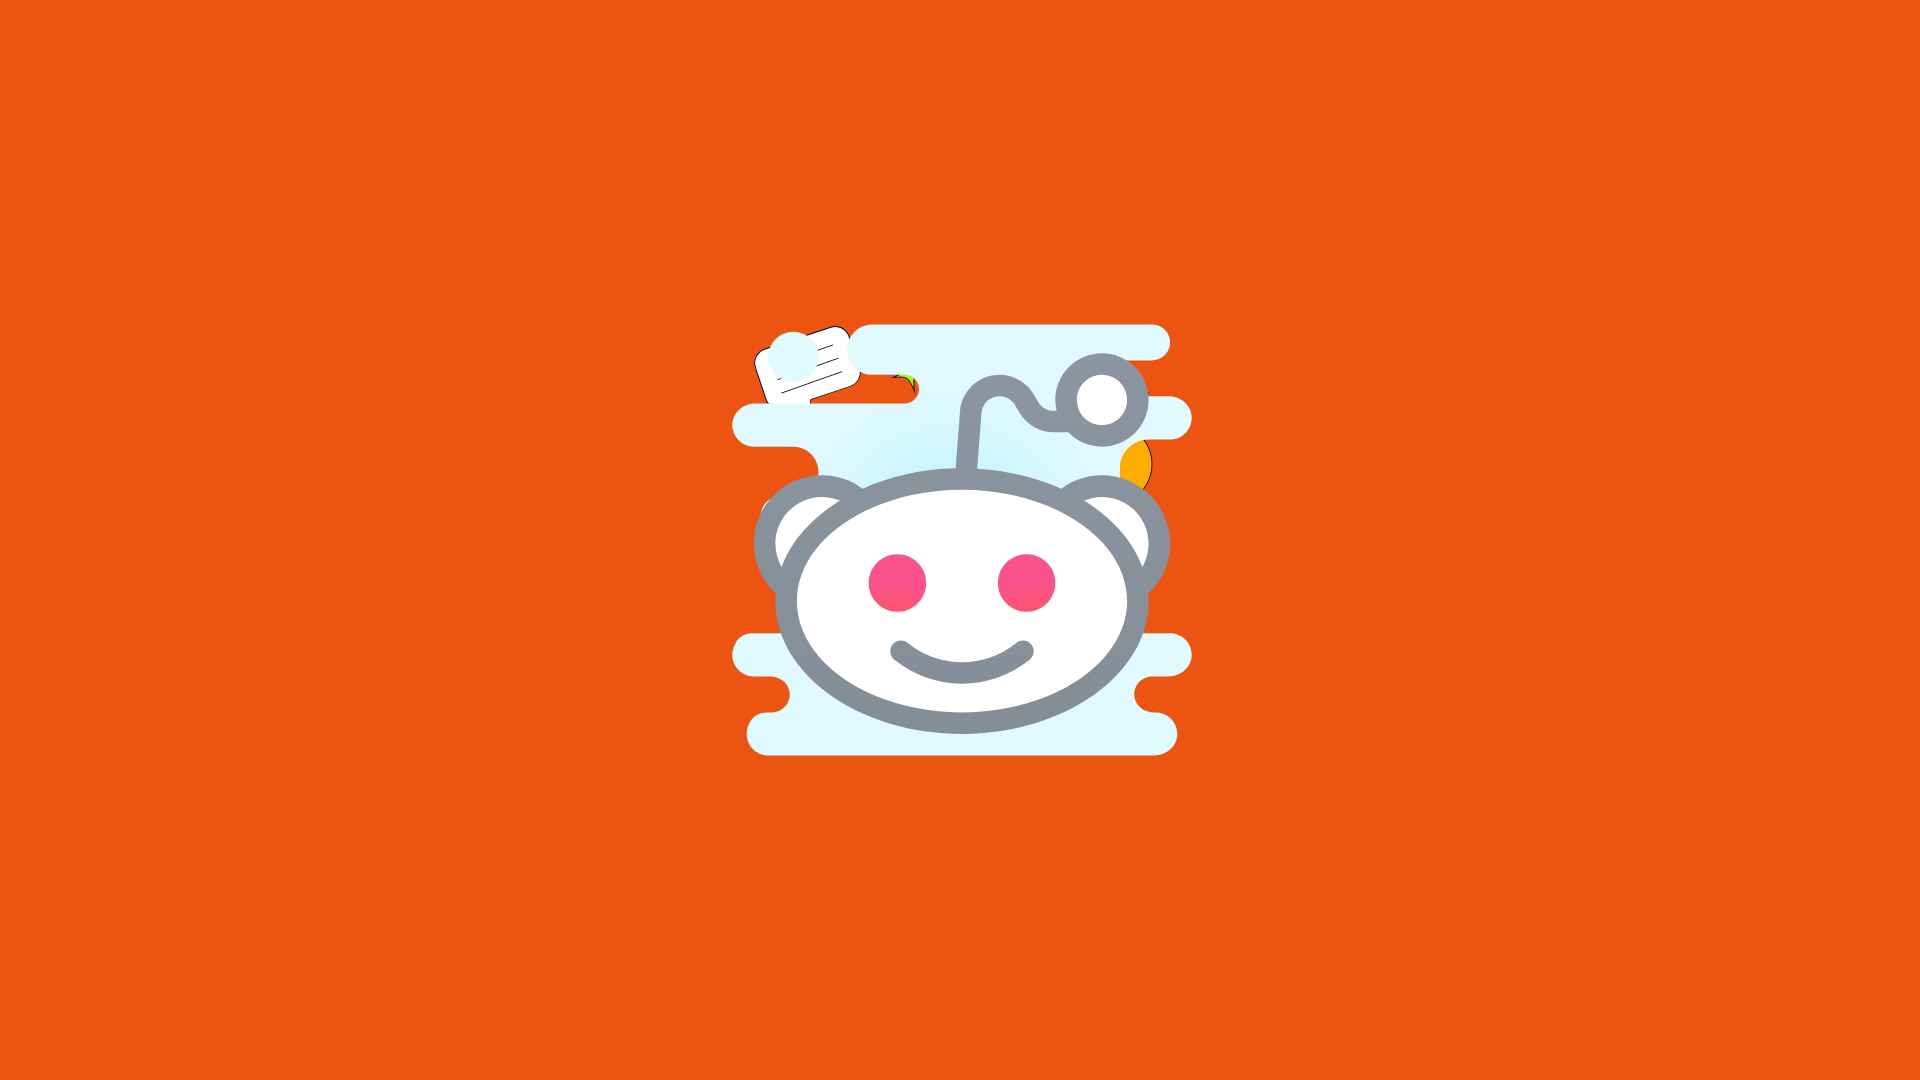 How can you stay updated with the latest news and trends on Reddit?